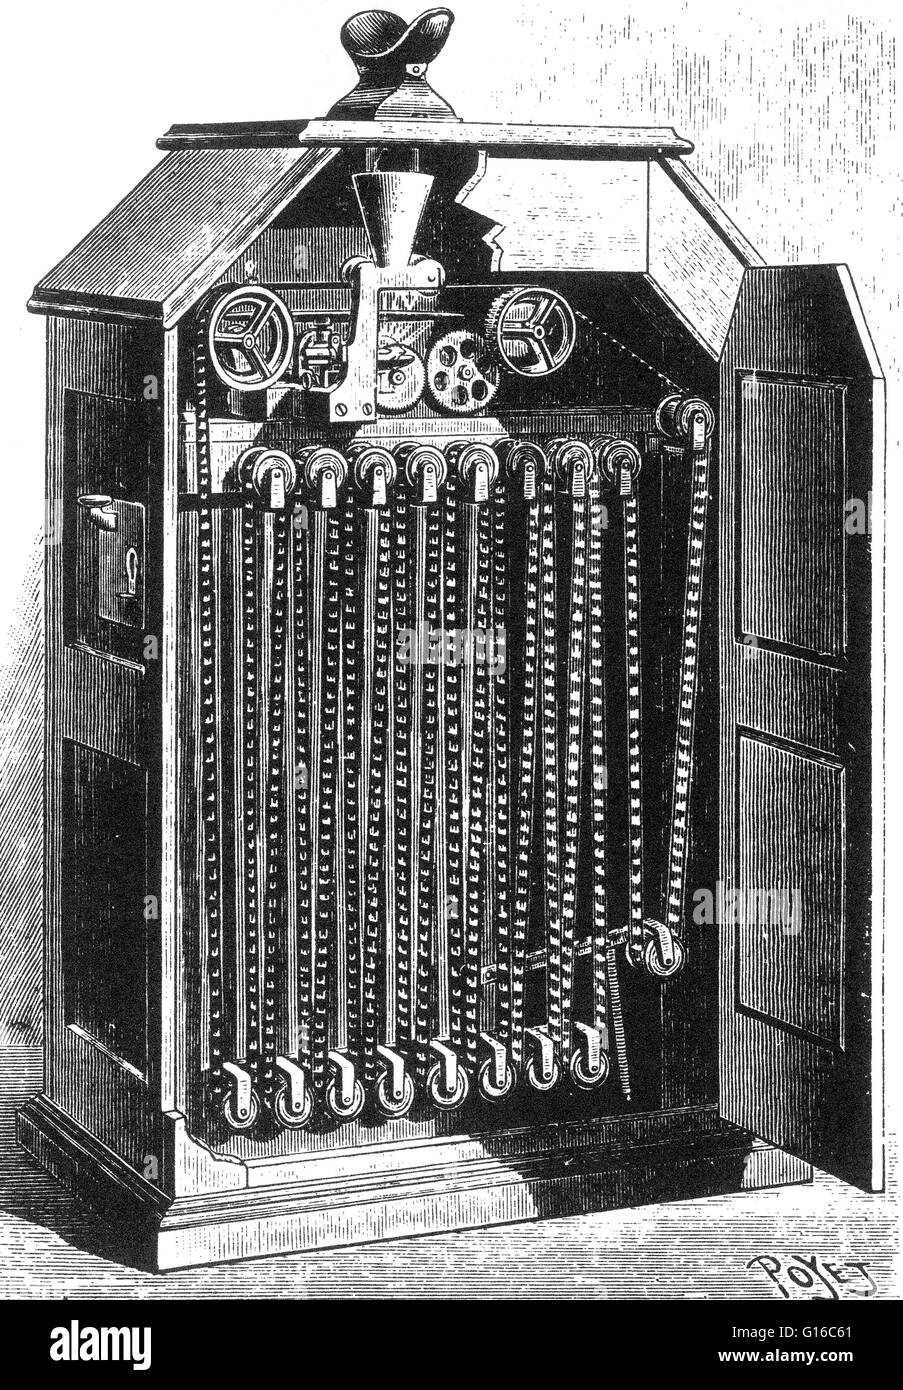 The 35 mm film travelled continuously over a bank of rollers, each picture being viewed briefly through a narrow slot in the revolving shutter. The Kinetoscope is an early motion picture exhibition device. The Kinetoscope was designed for films to be view Stock Photo